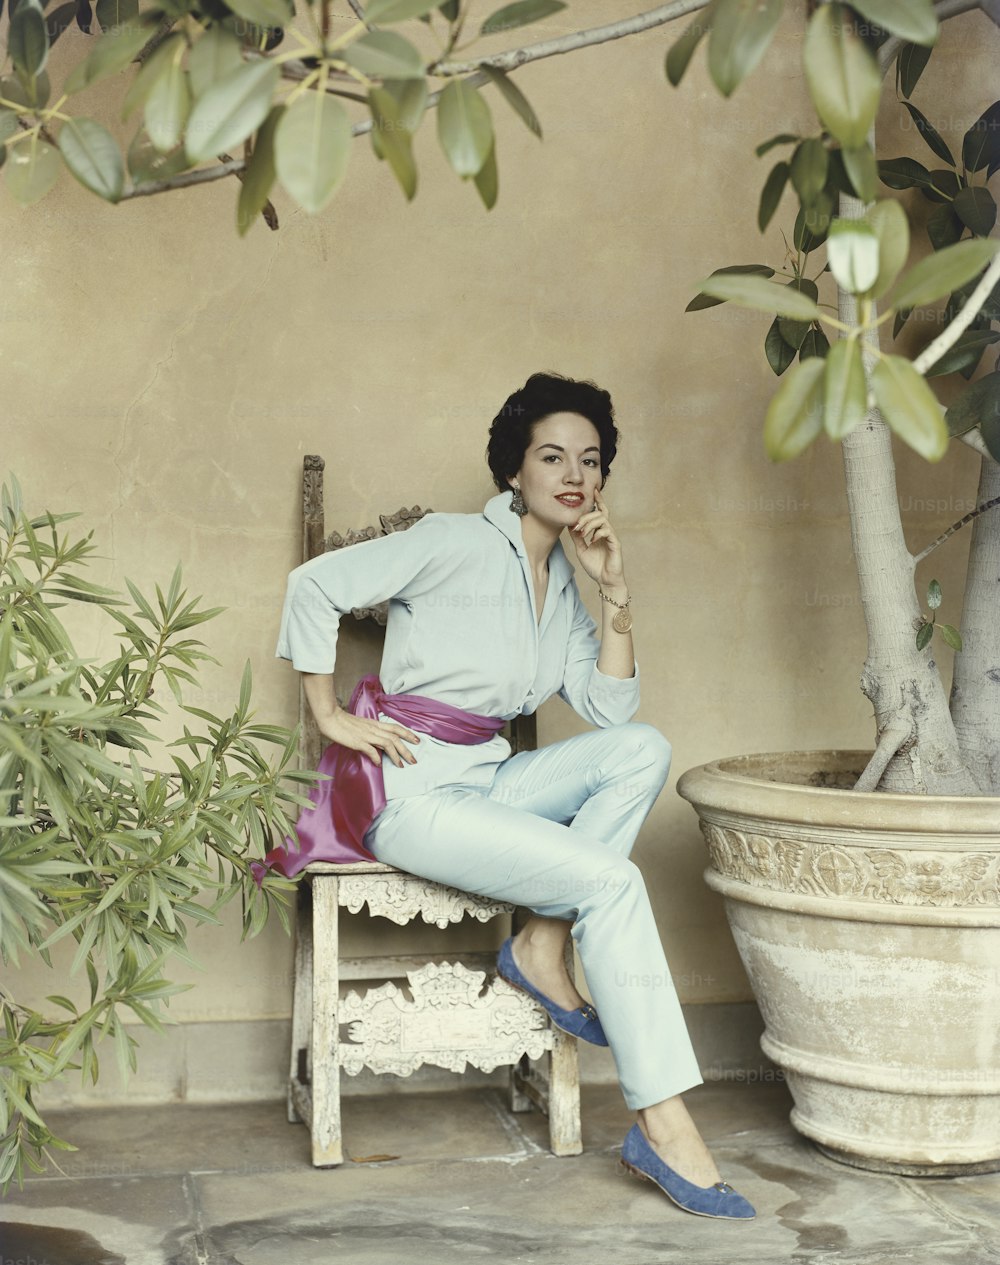 a woman sitting on a chair next to a potted plant